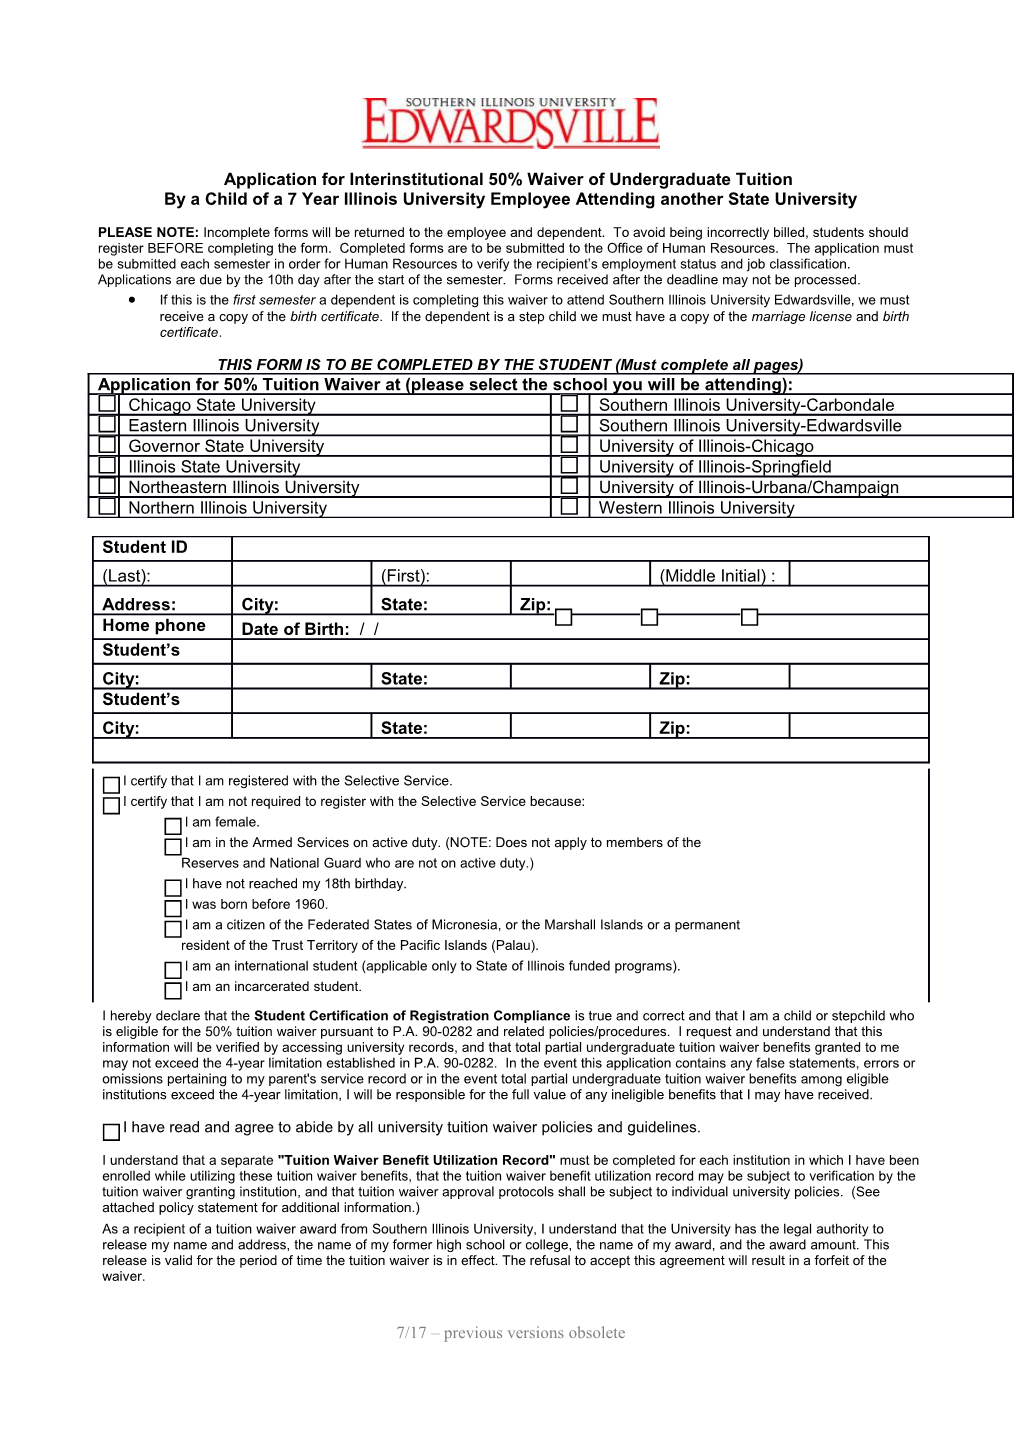 Application for 50% Waiver of Undergraduate Tuition